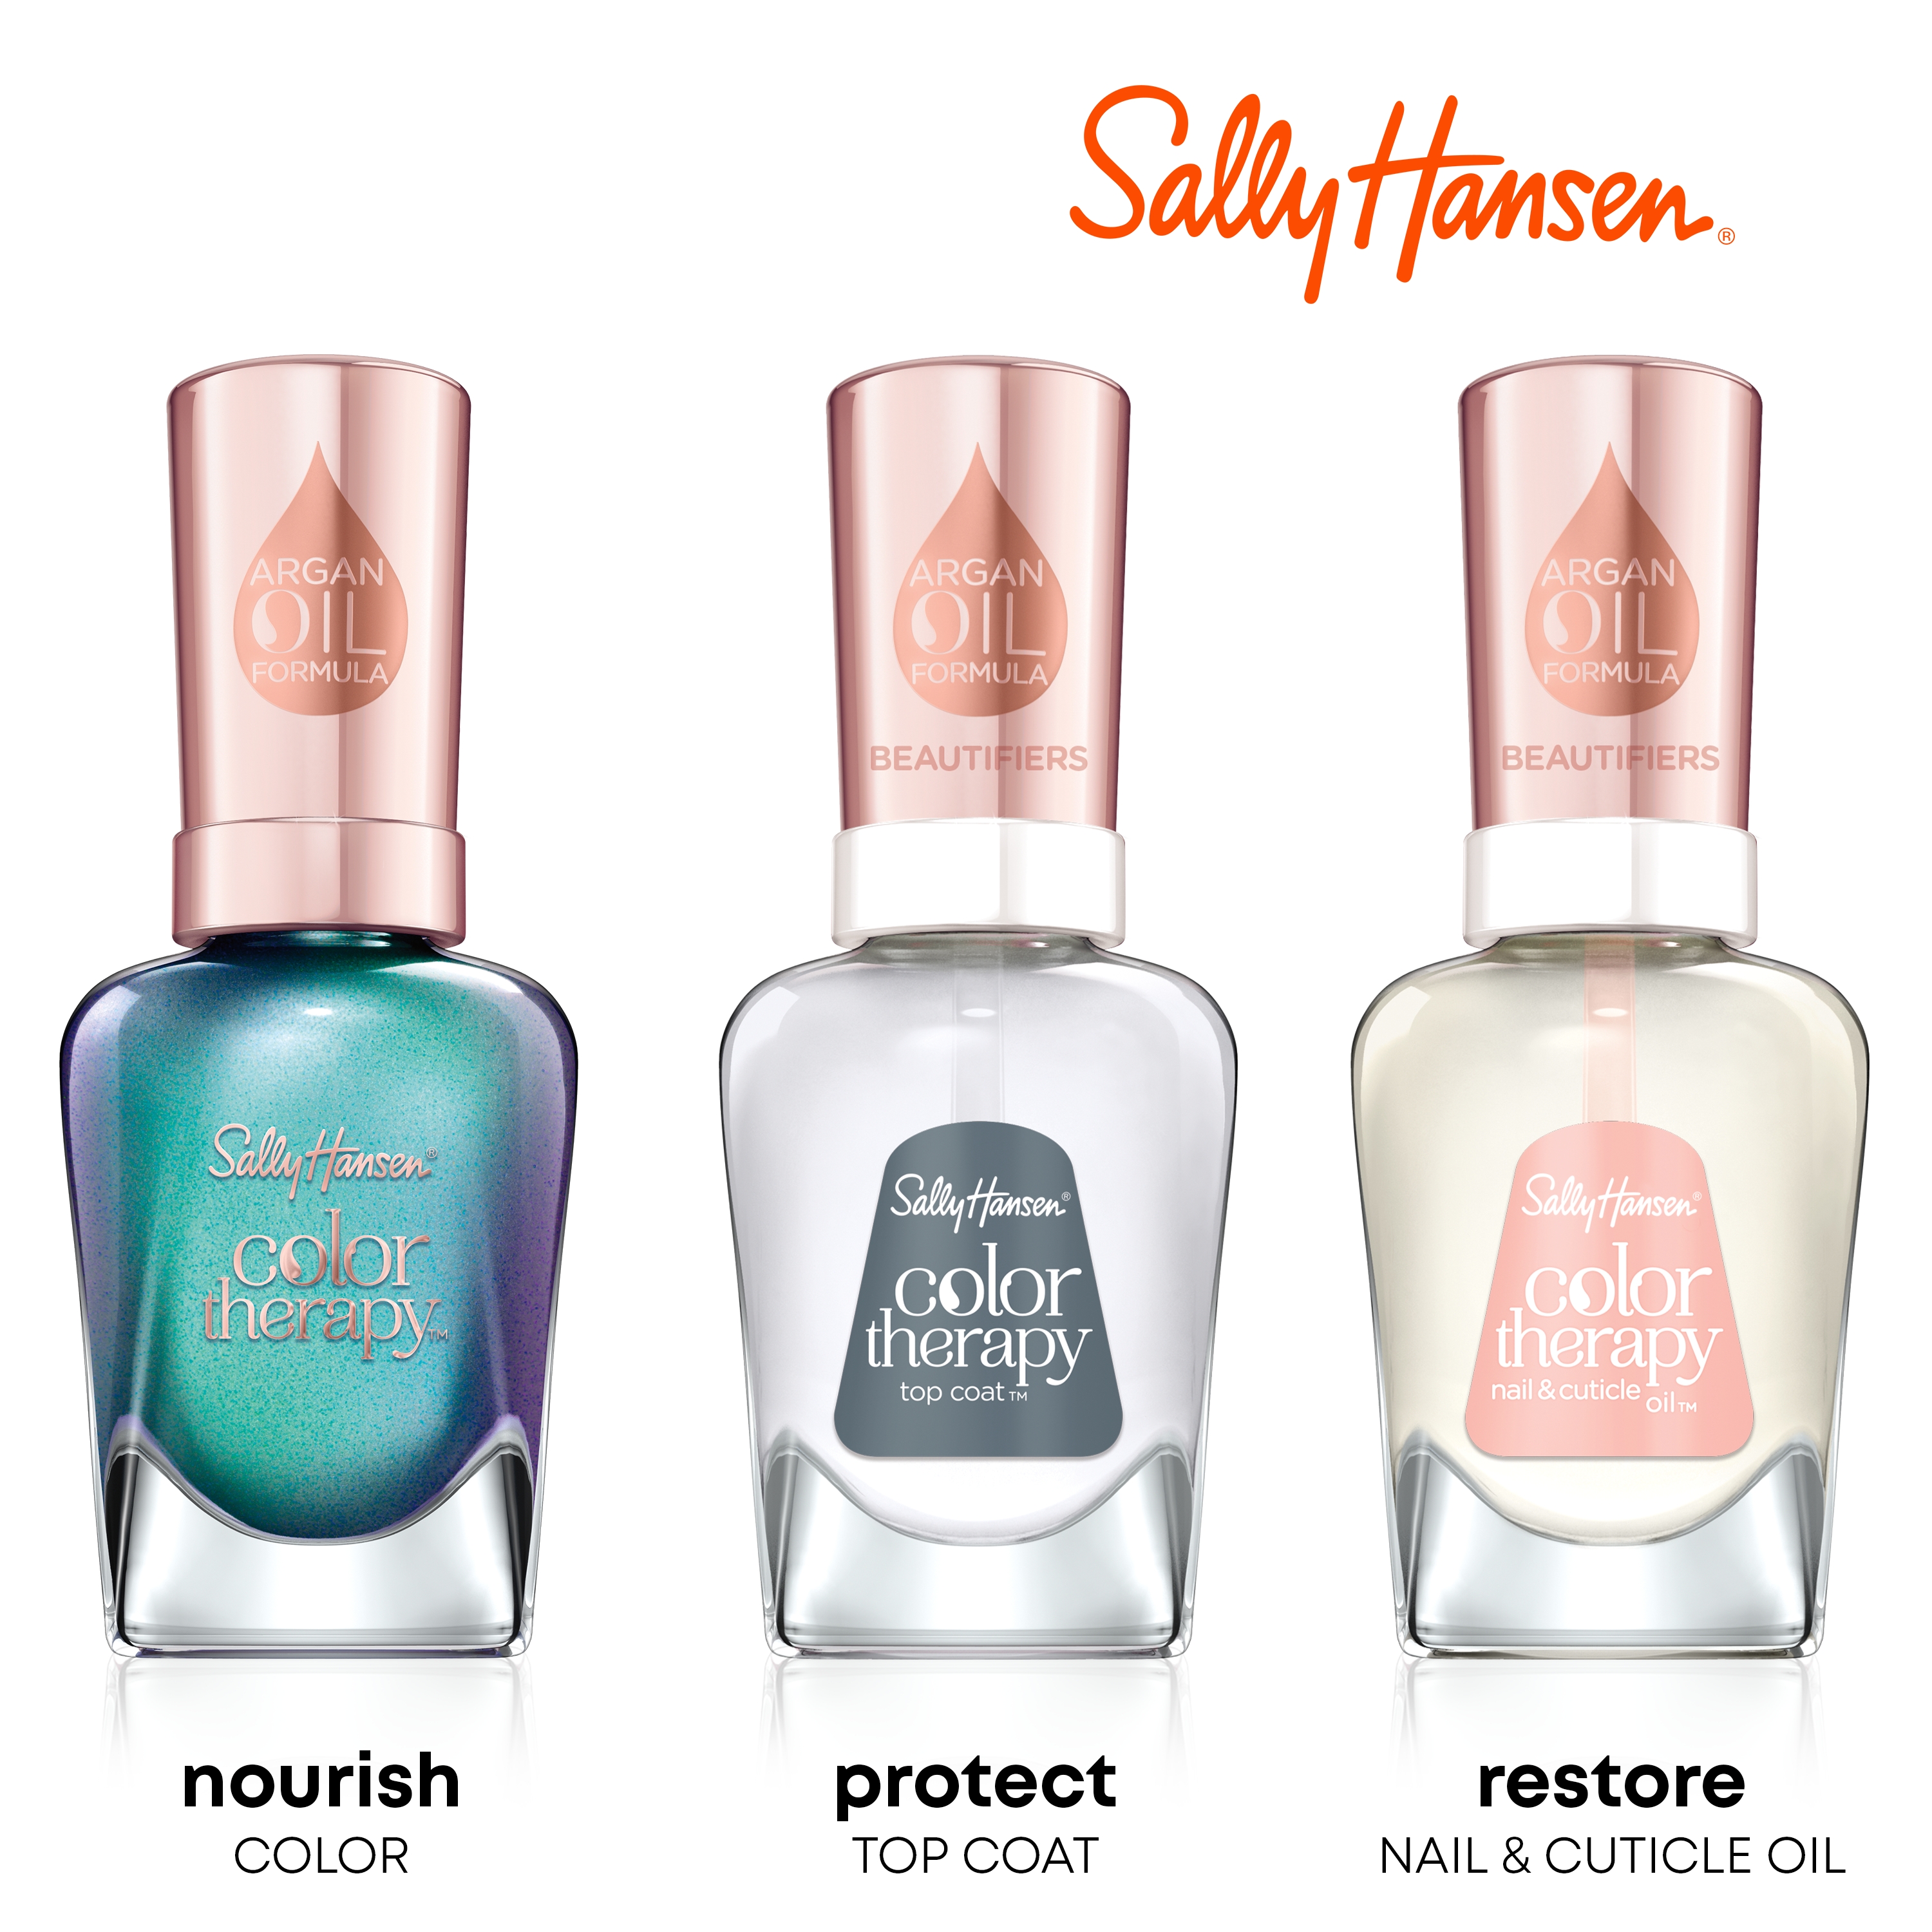 Sally Hansen Color Therapy Nail Color, Namas-Grey, 0.5 oz, Color Nail Polish, Nail Polish, Nail Polish Colors, Restorative, Argan Oil Formula, Instantly Moisturizes - image 5 of 13